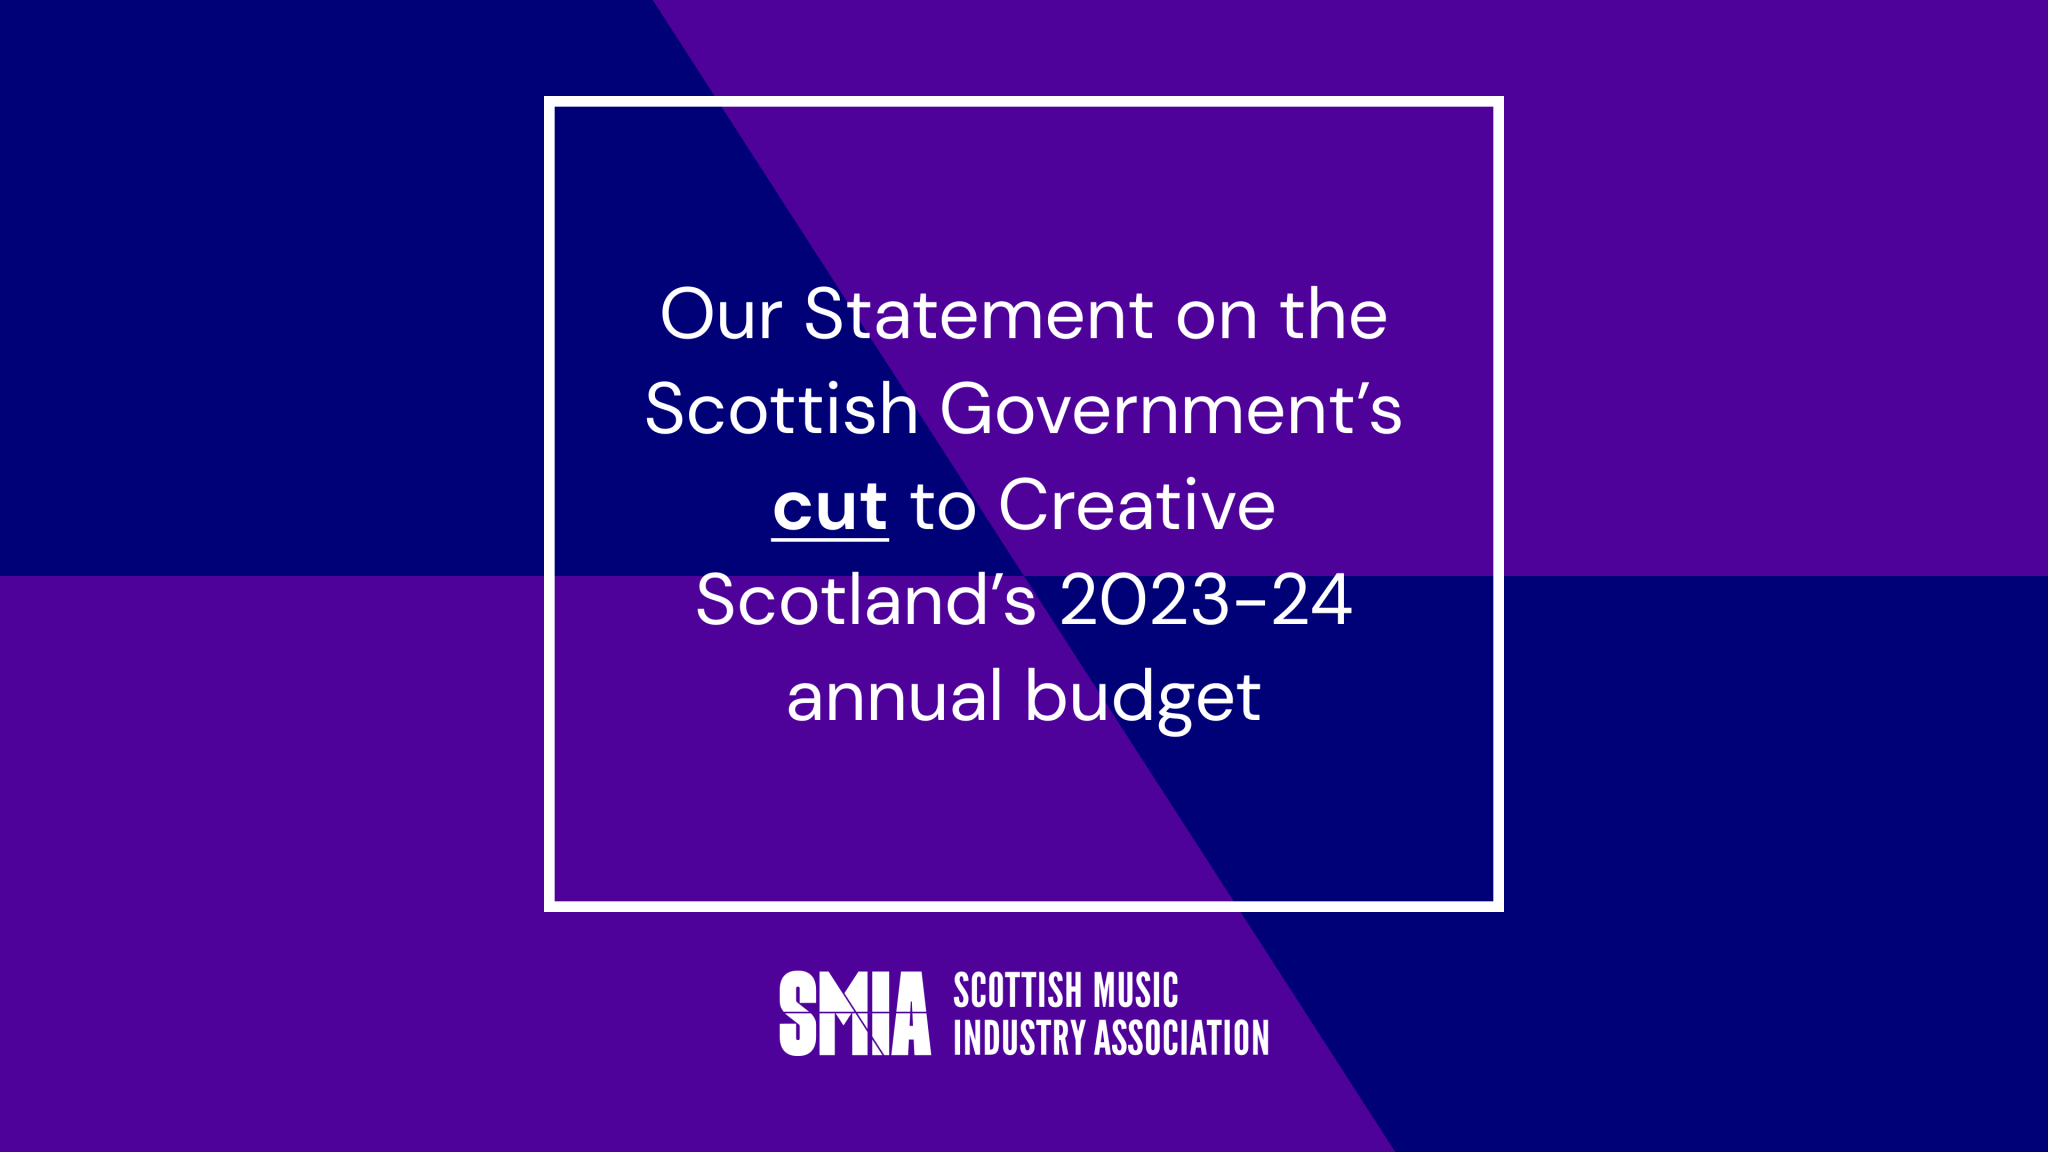 NEWS: SMIA STATEMENT ON THE SCOTTISH GOVERNMENT’S CUTS TO THE CREATIVE SCOTLAND 2023-2024 ANNUAL BUDGET